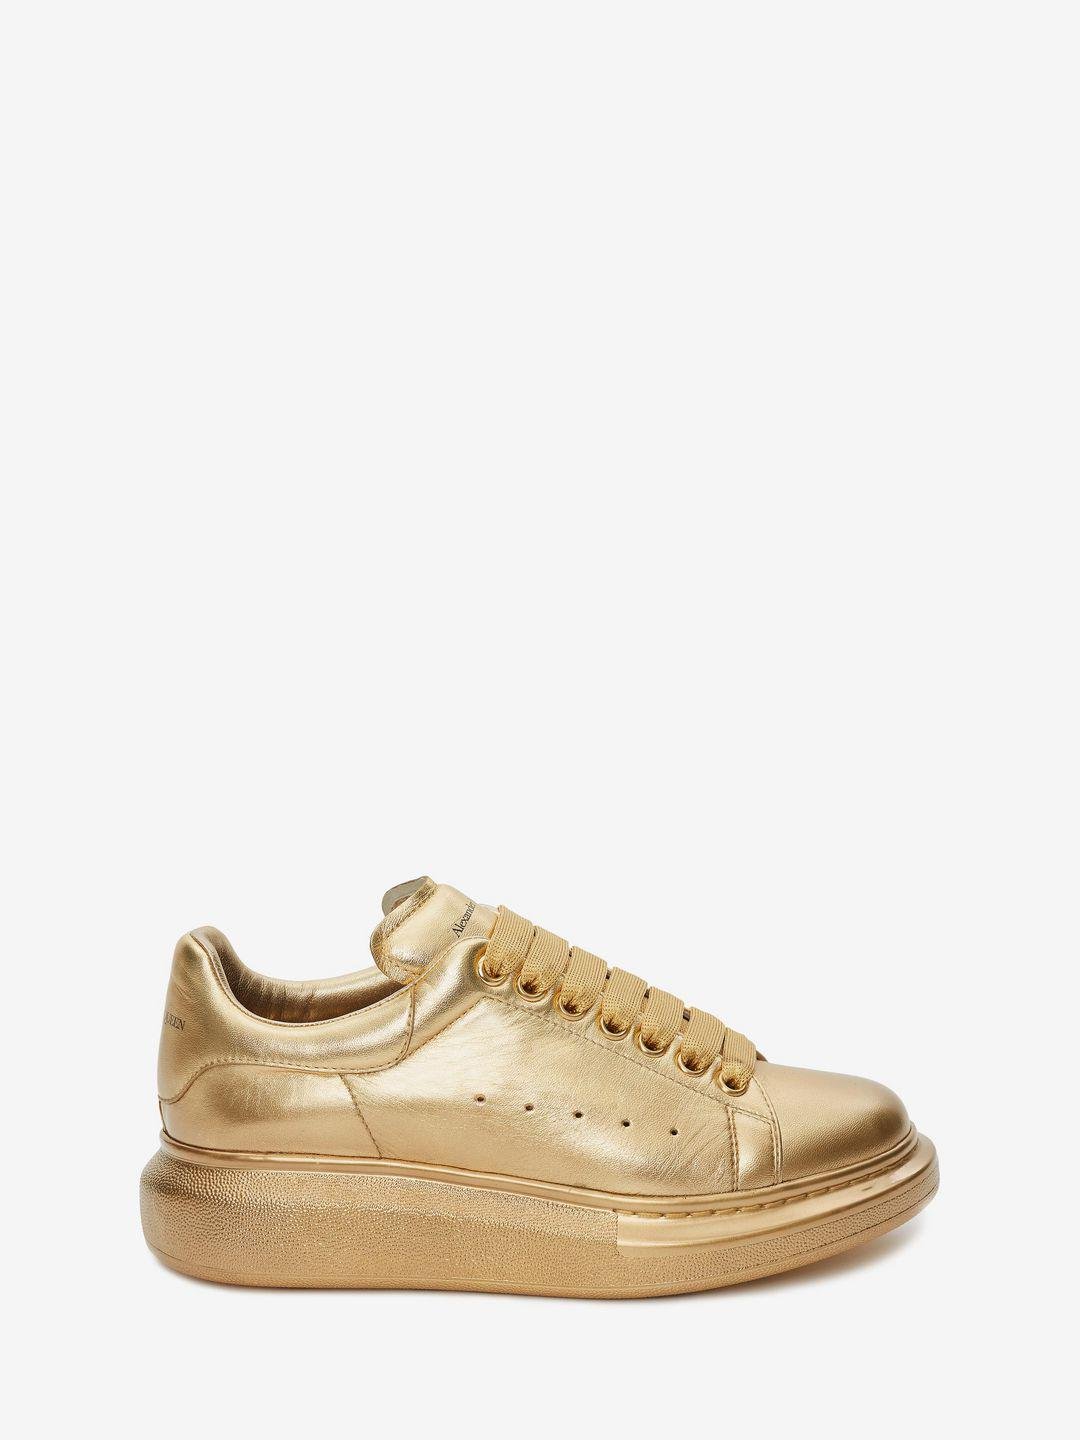 Alexander McQueen oversized trainers in metal gold and white 💖 | Mcqueen  sneakers, Platform tennis shoes, White sneakers